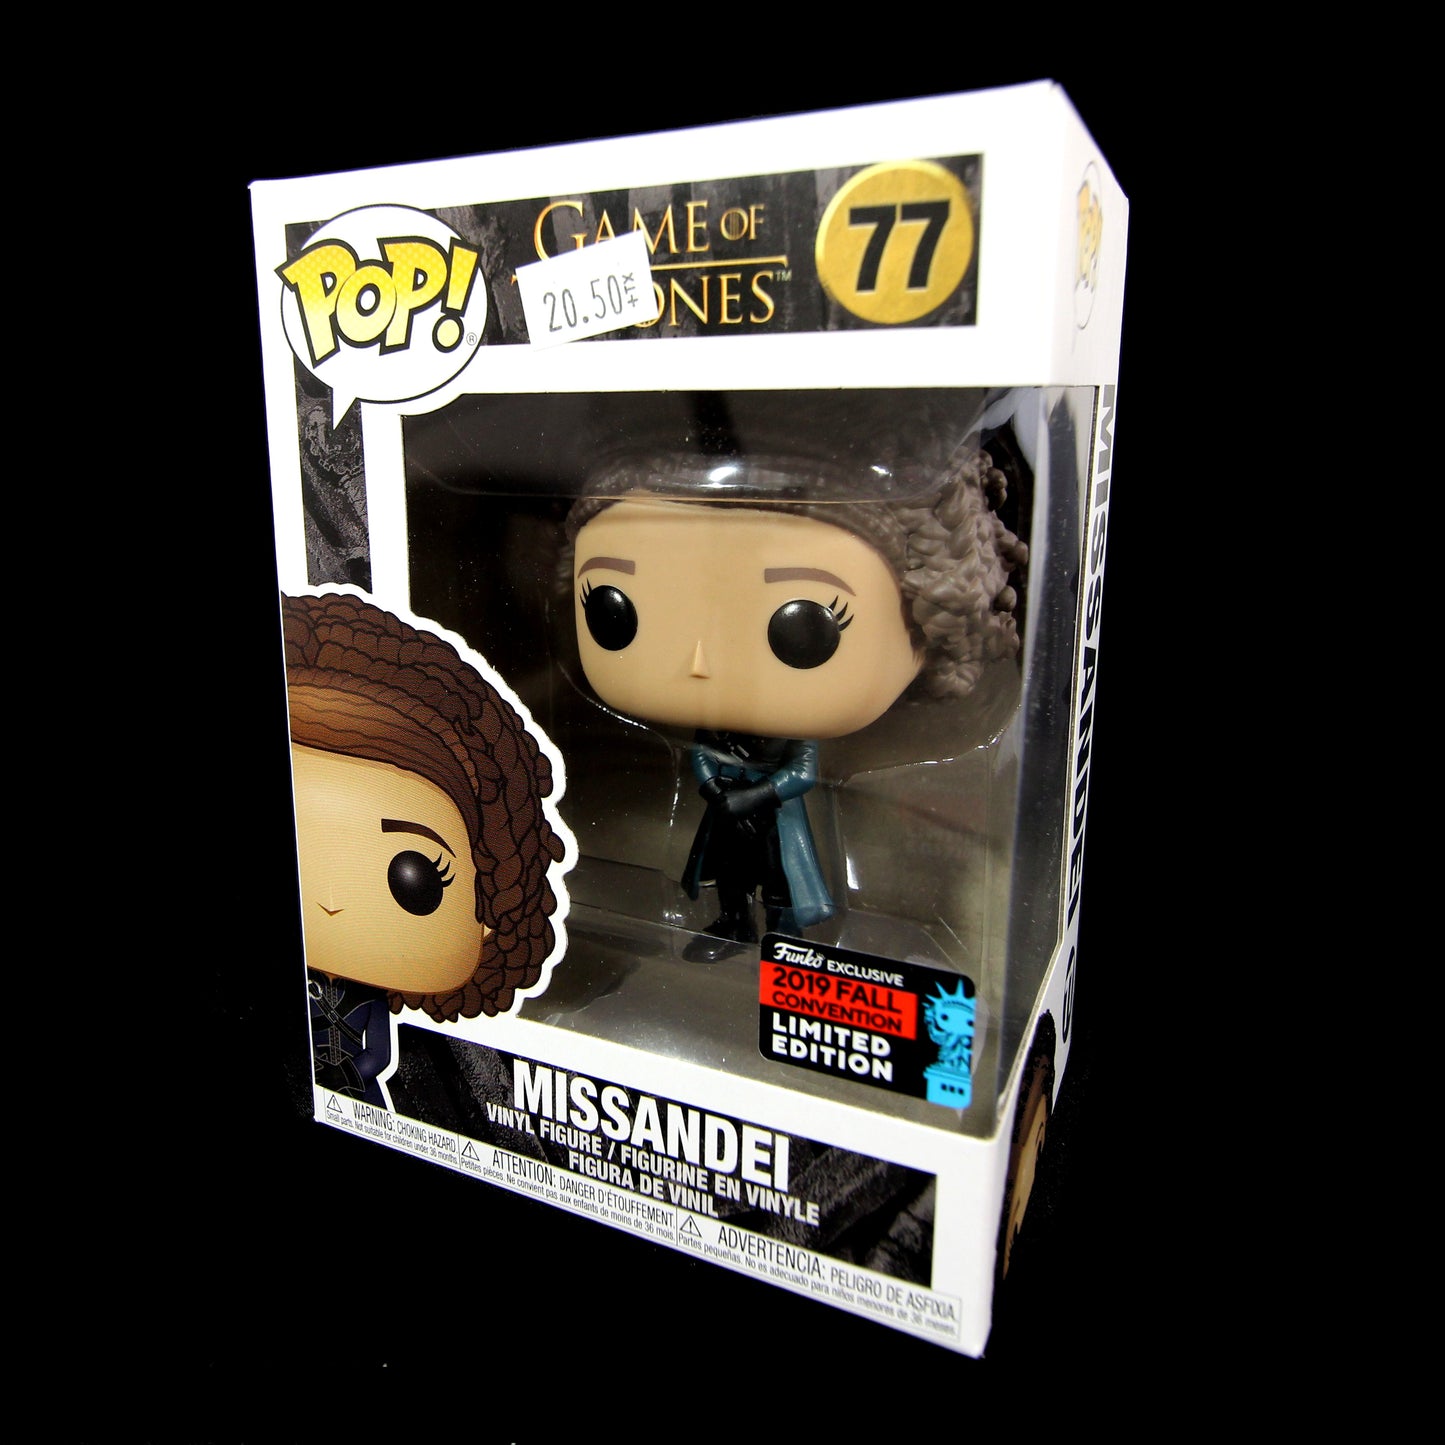 Funko Pop Game of Thrones Missandei 2019 Fall Convention Special Edition 77